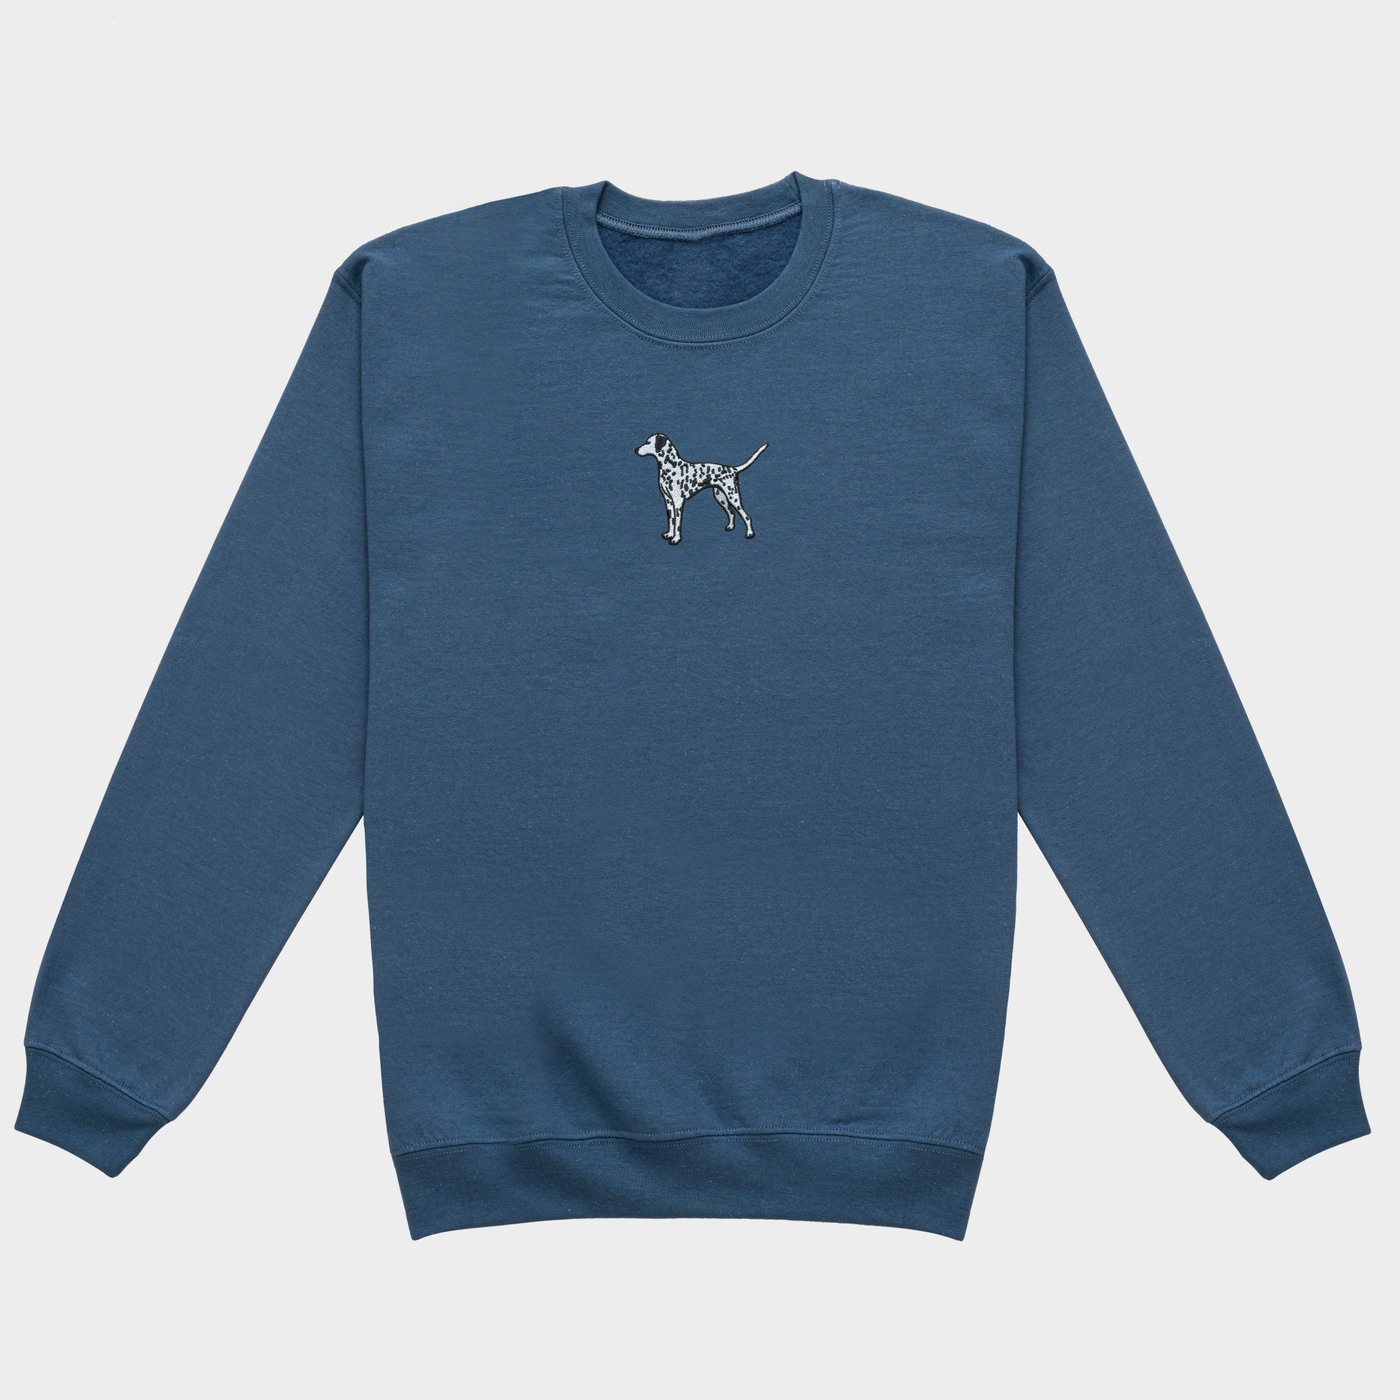 Bobby's Planet Men's Embroidered Dalmatian Sweatshirt from Paws Dog Cat Animals Collection in Indigo Blue Color#color_indigo-blue